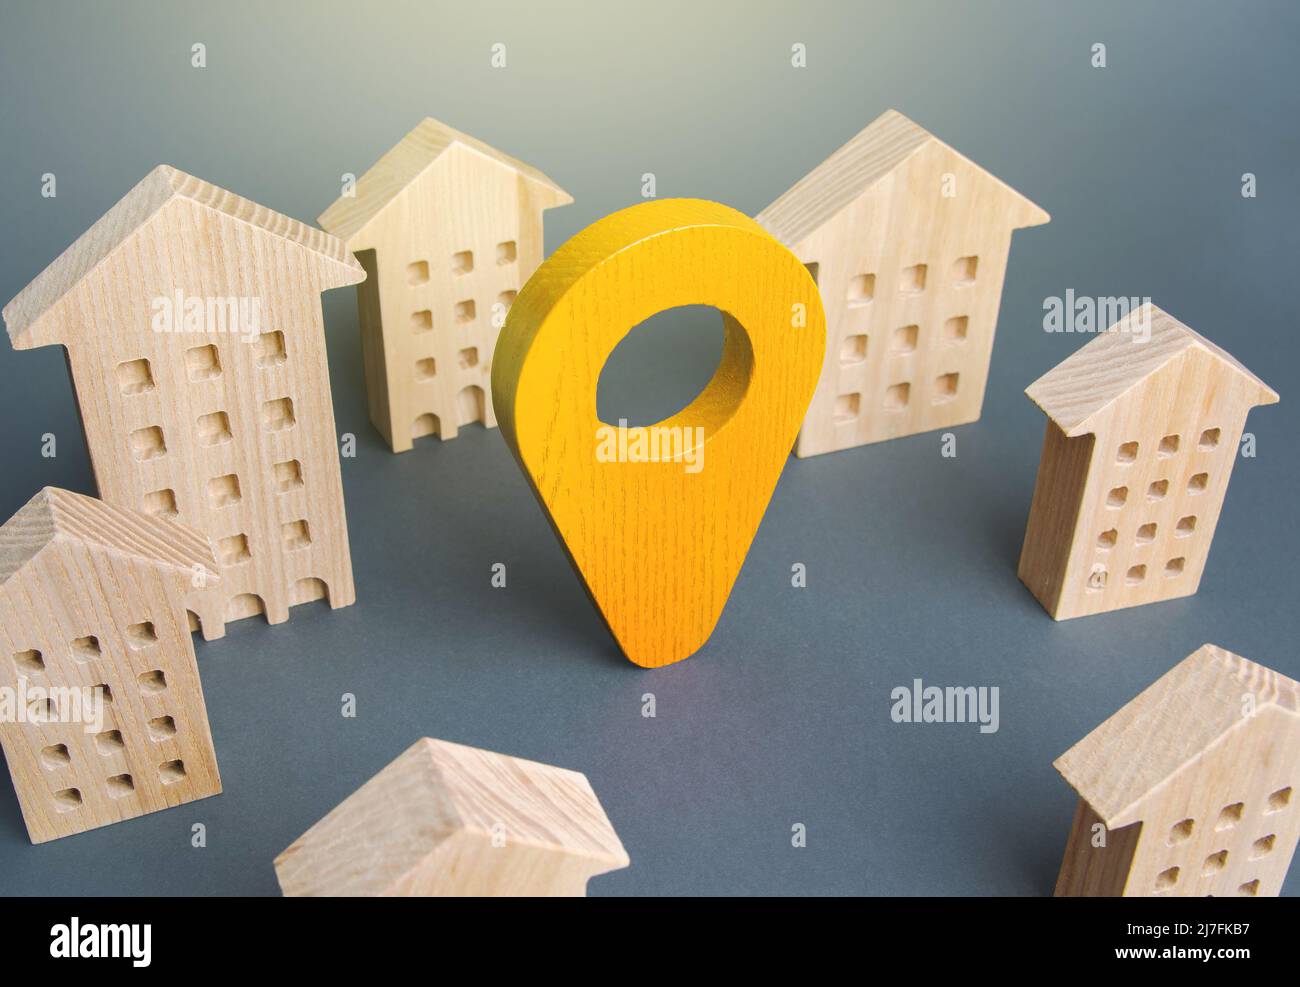 Yellow location indicator among houses. Delivery. Tracking and navigation. Internet of things, city management and city services municipal. Celebratio Stock Photo